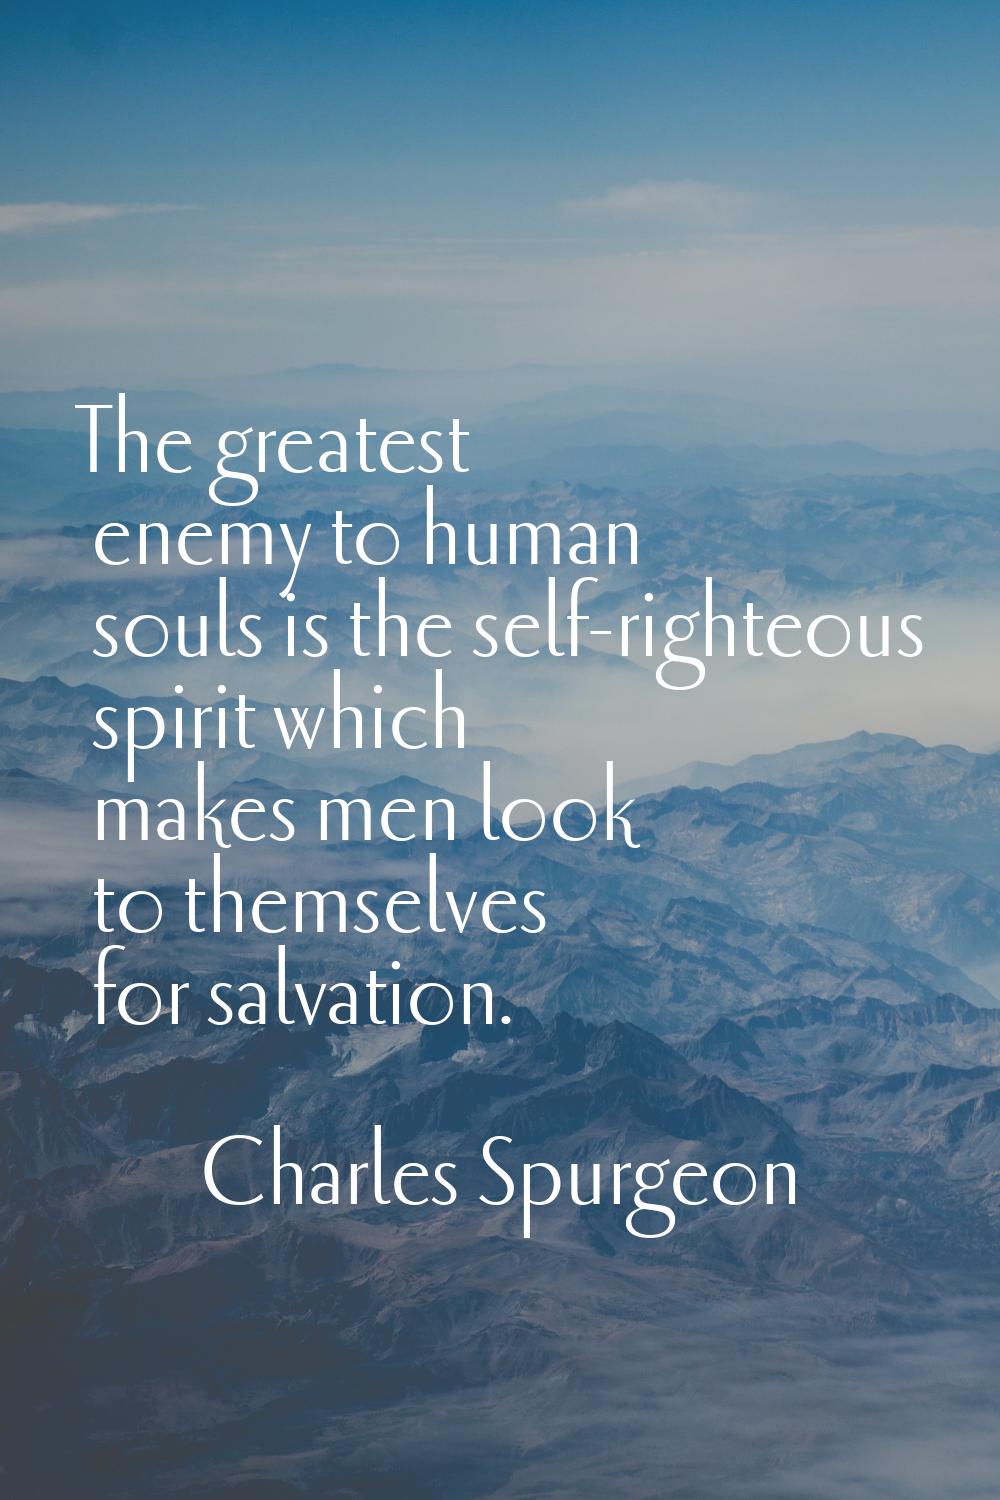 The greatest enemy to human souls is the self-righteous spirit which makes men look to themselves f